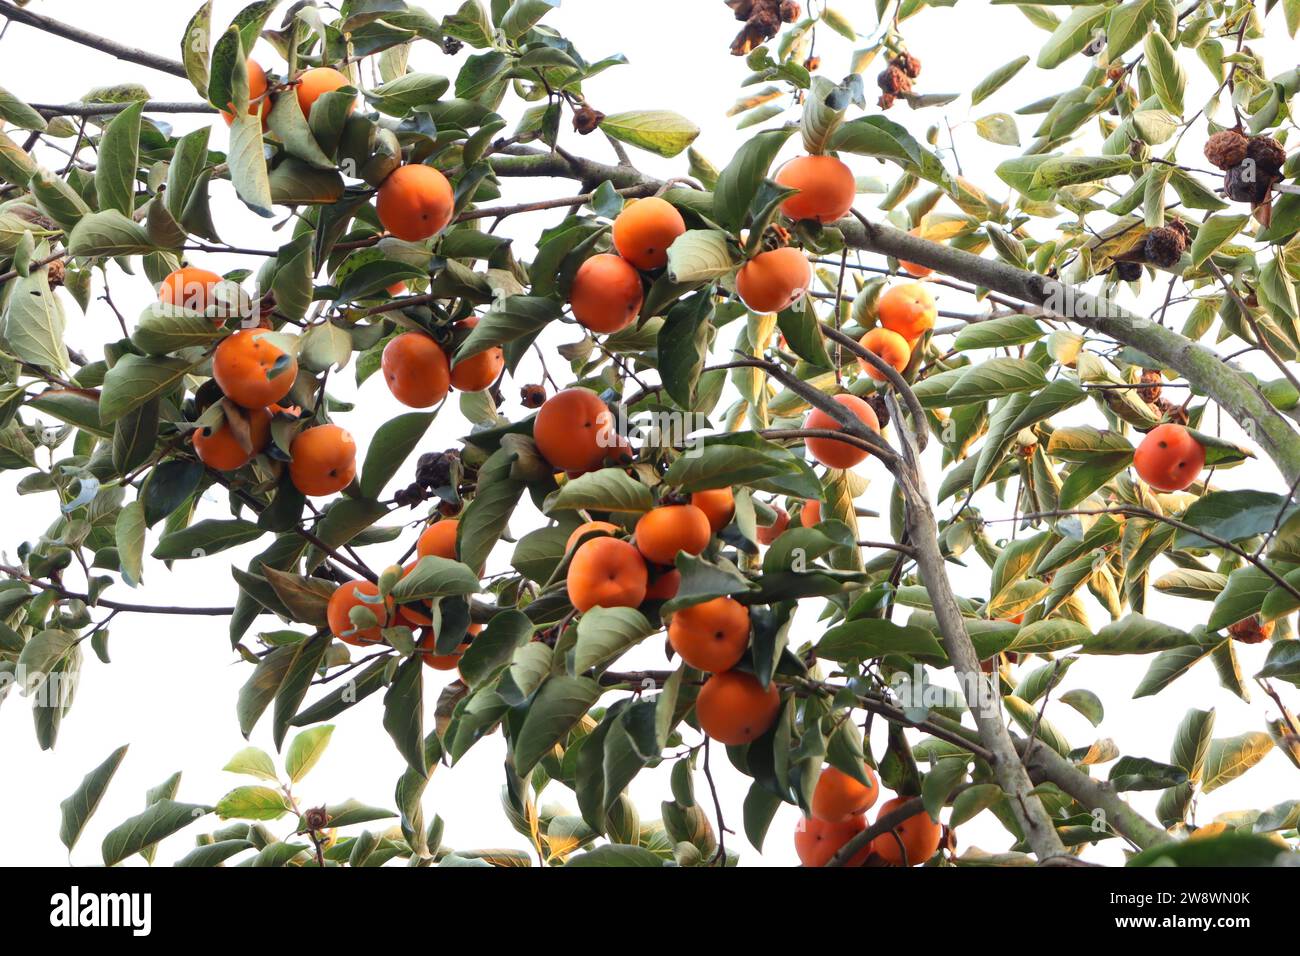 Photo of a tree full of persimmons Stock Photo